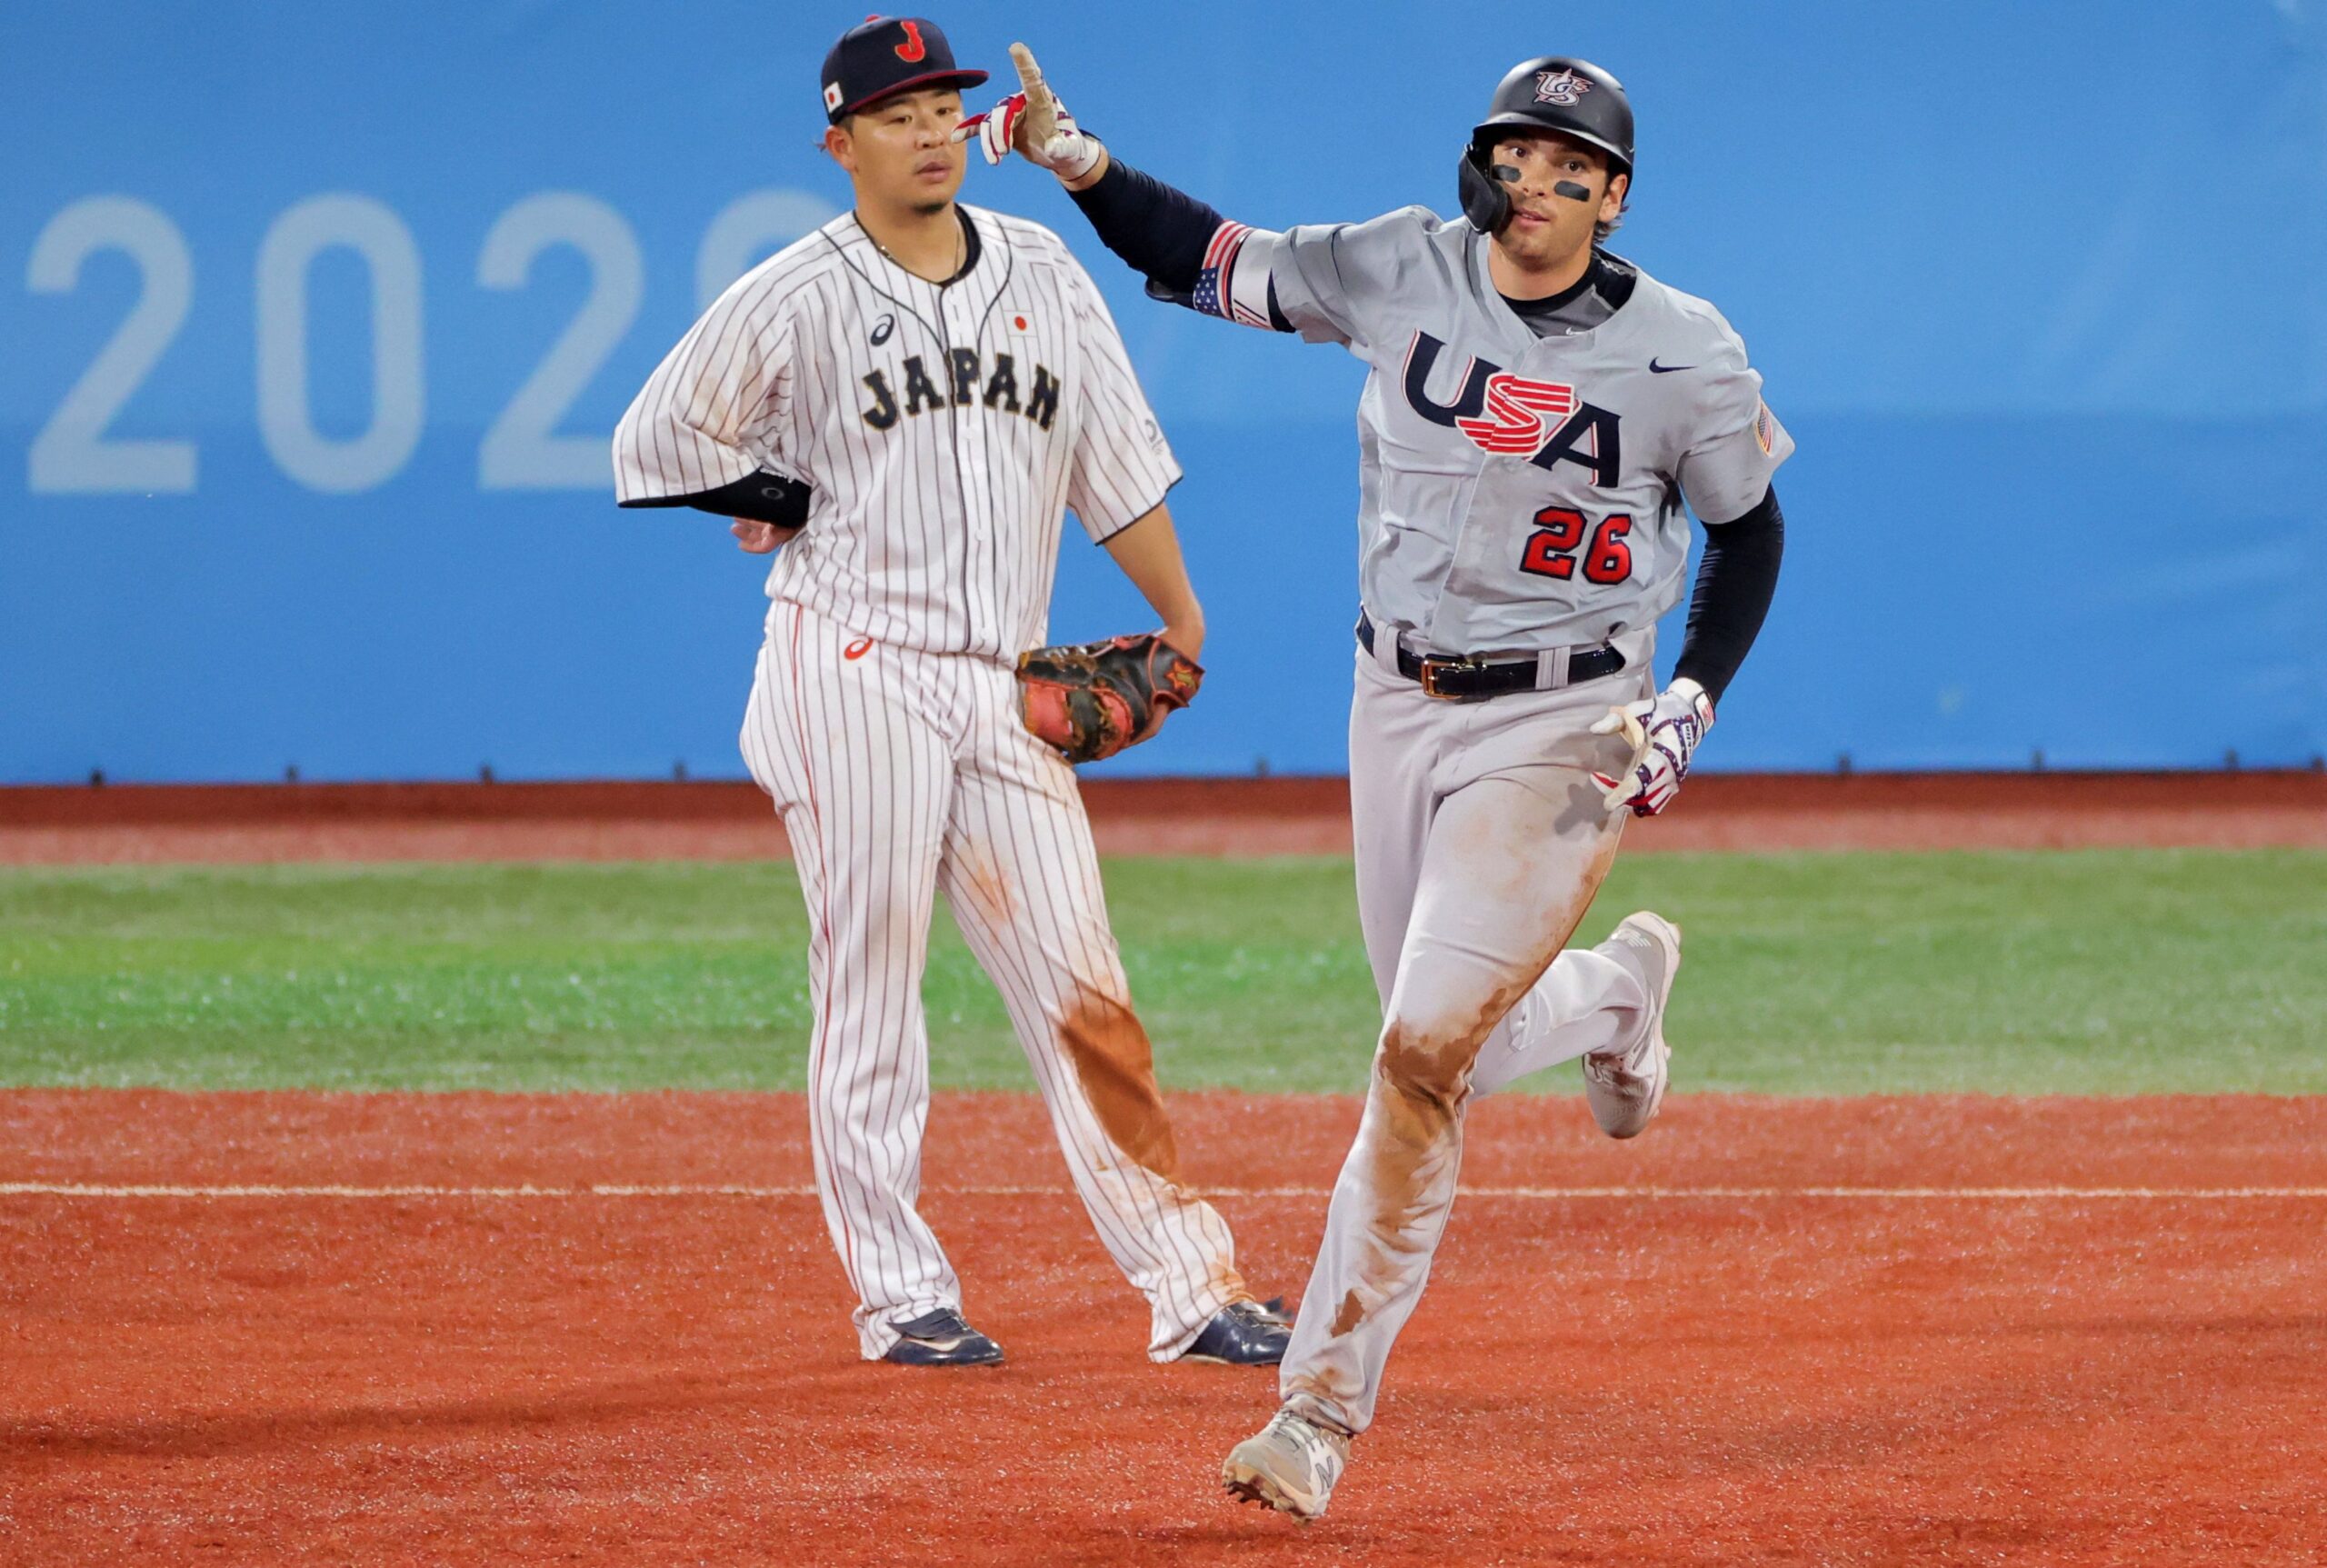 Red Sox prospect Triston Casas homers, but US falls to Japan 7-6